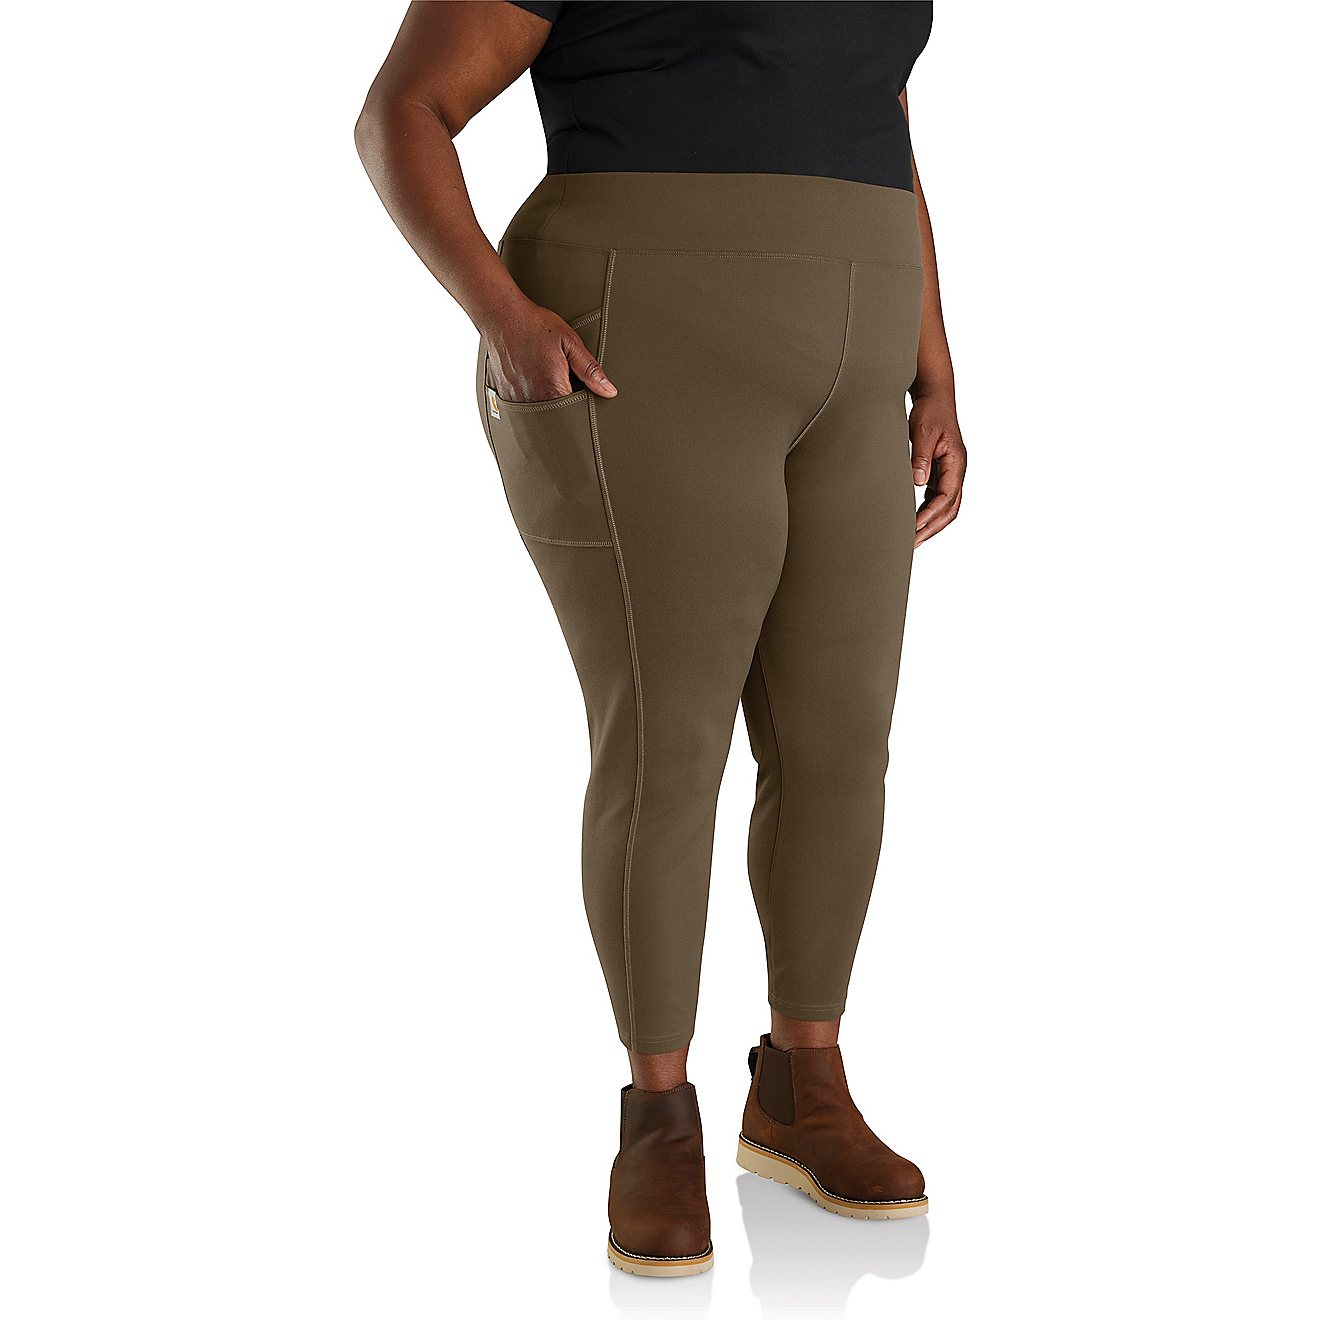 Carhartt Women's Force Fitted Low Waist Ankle Length Plus Size